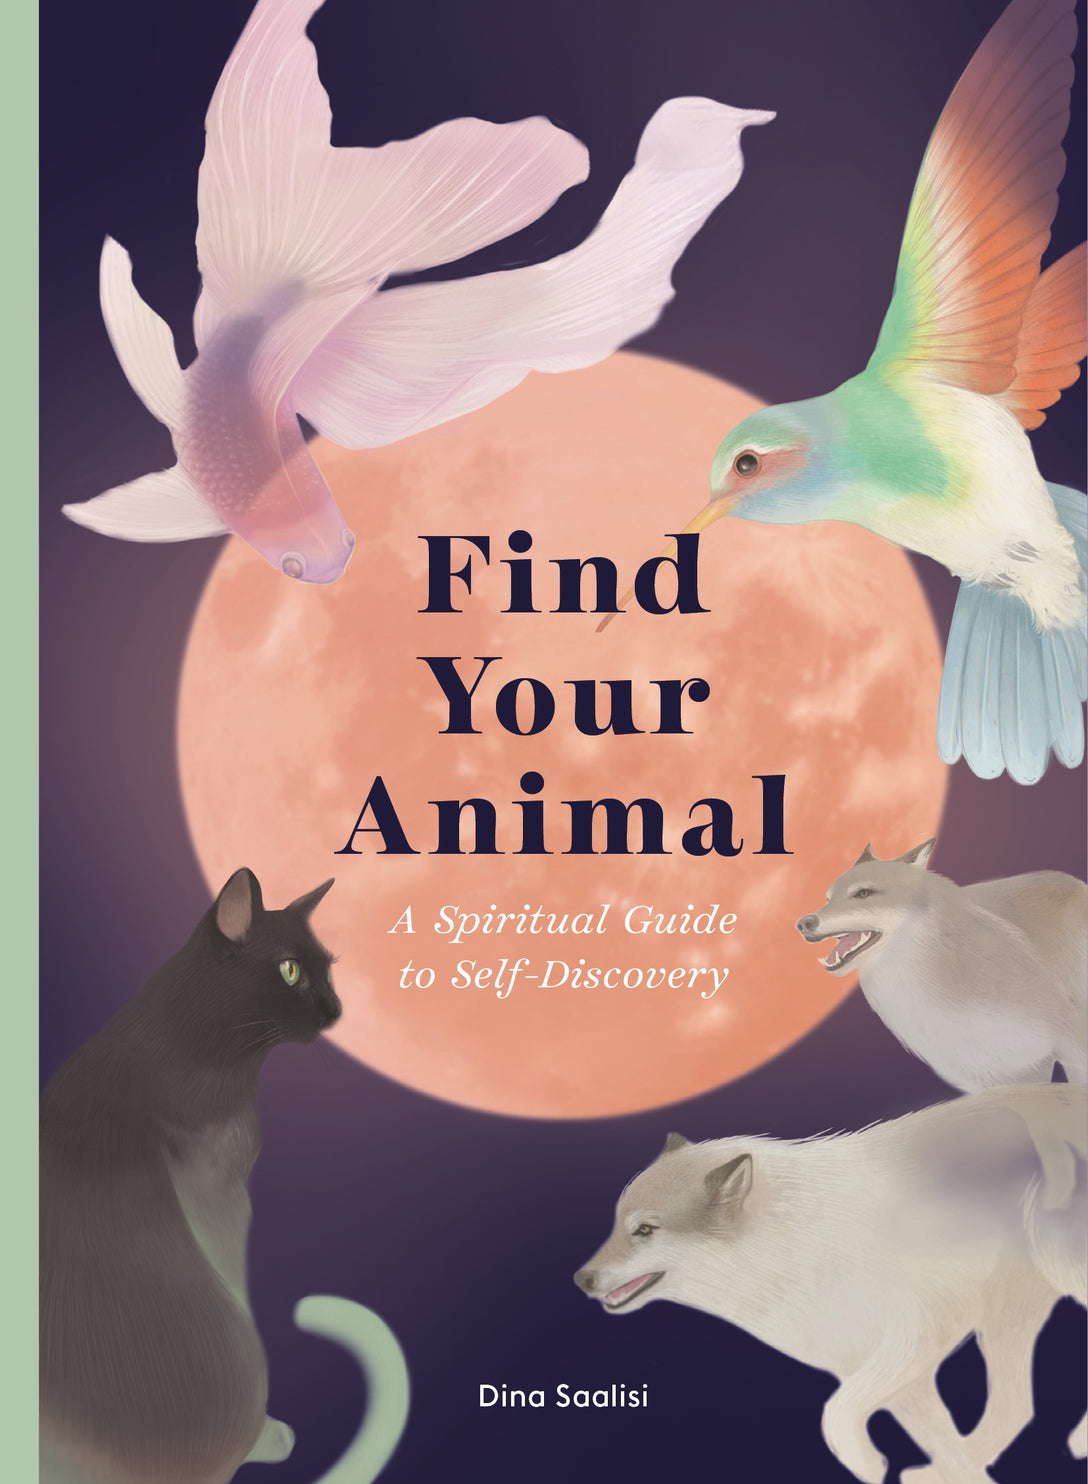 Find Your Animal by Dina Saalisi